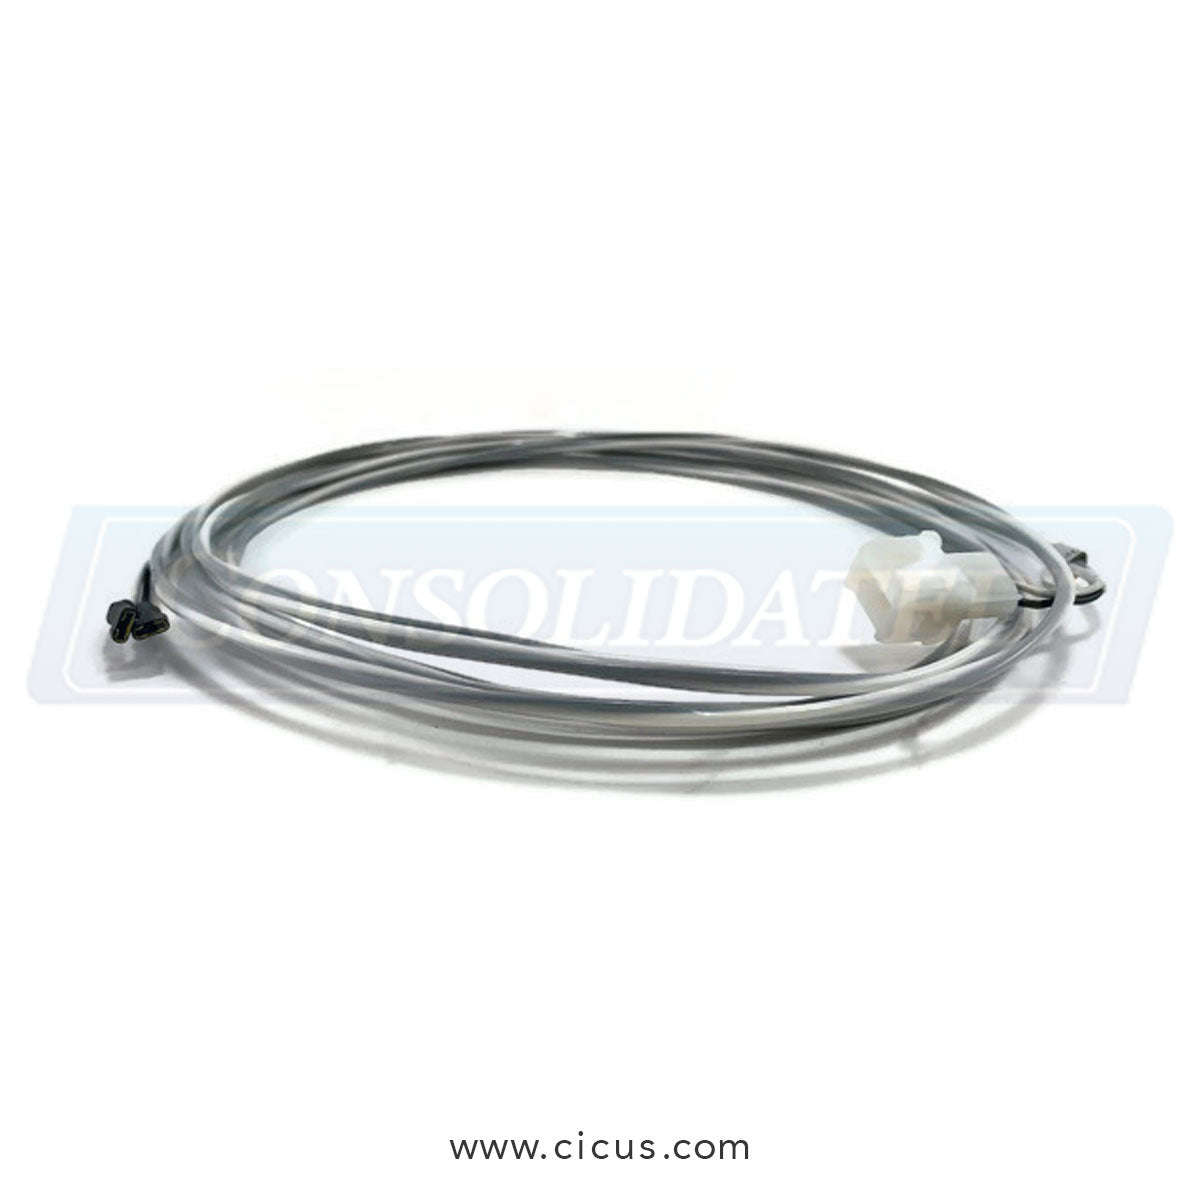 Alliance Laundry Systems Sensor Cable Harness [44016902P].